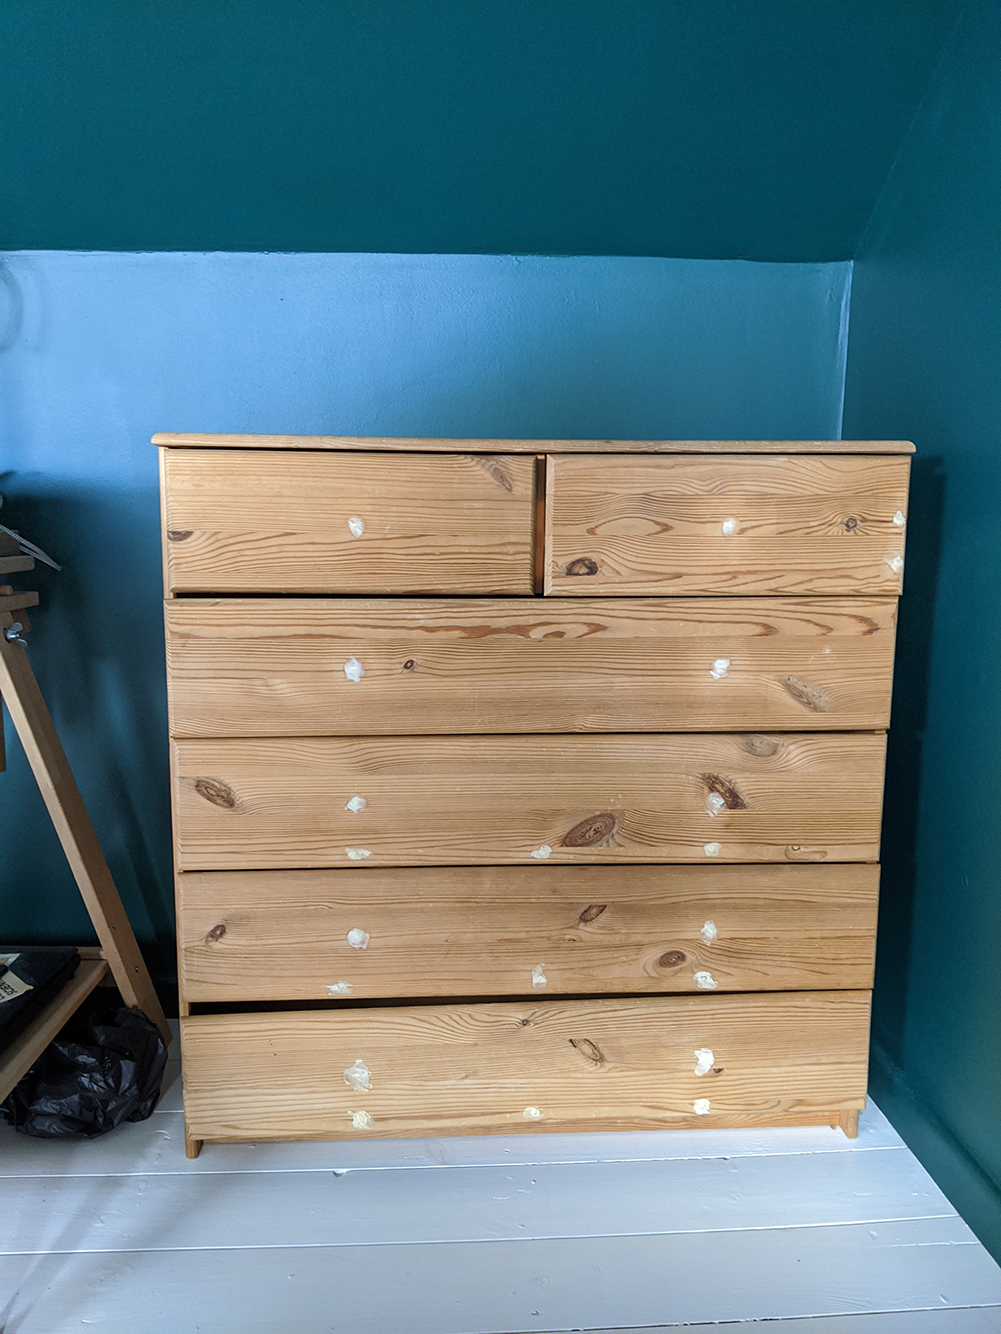 A photo of the chest of drawers before they were painted.